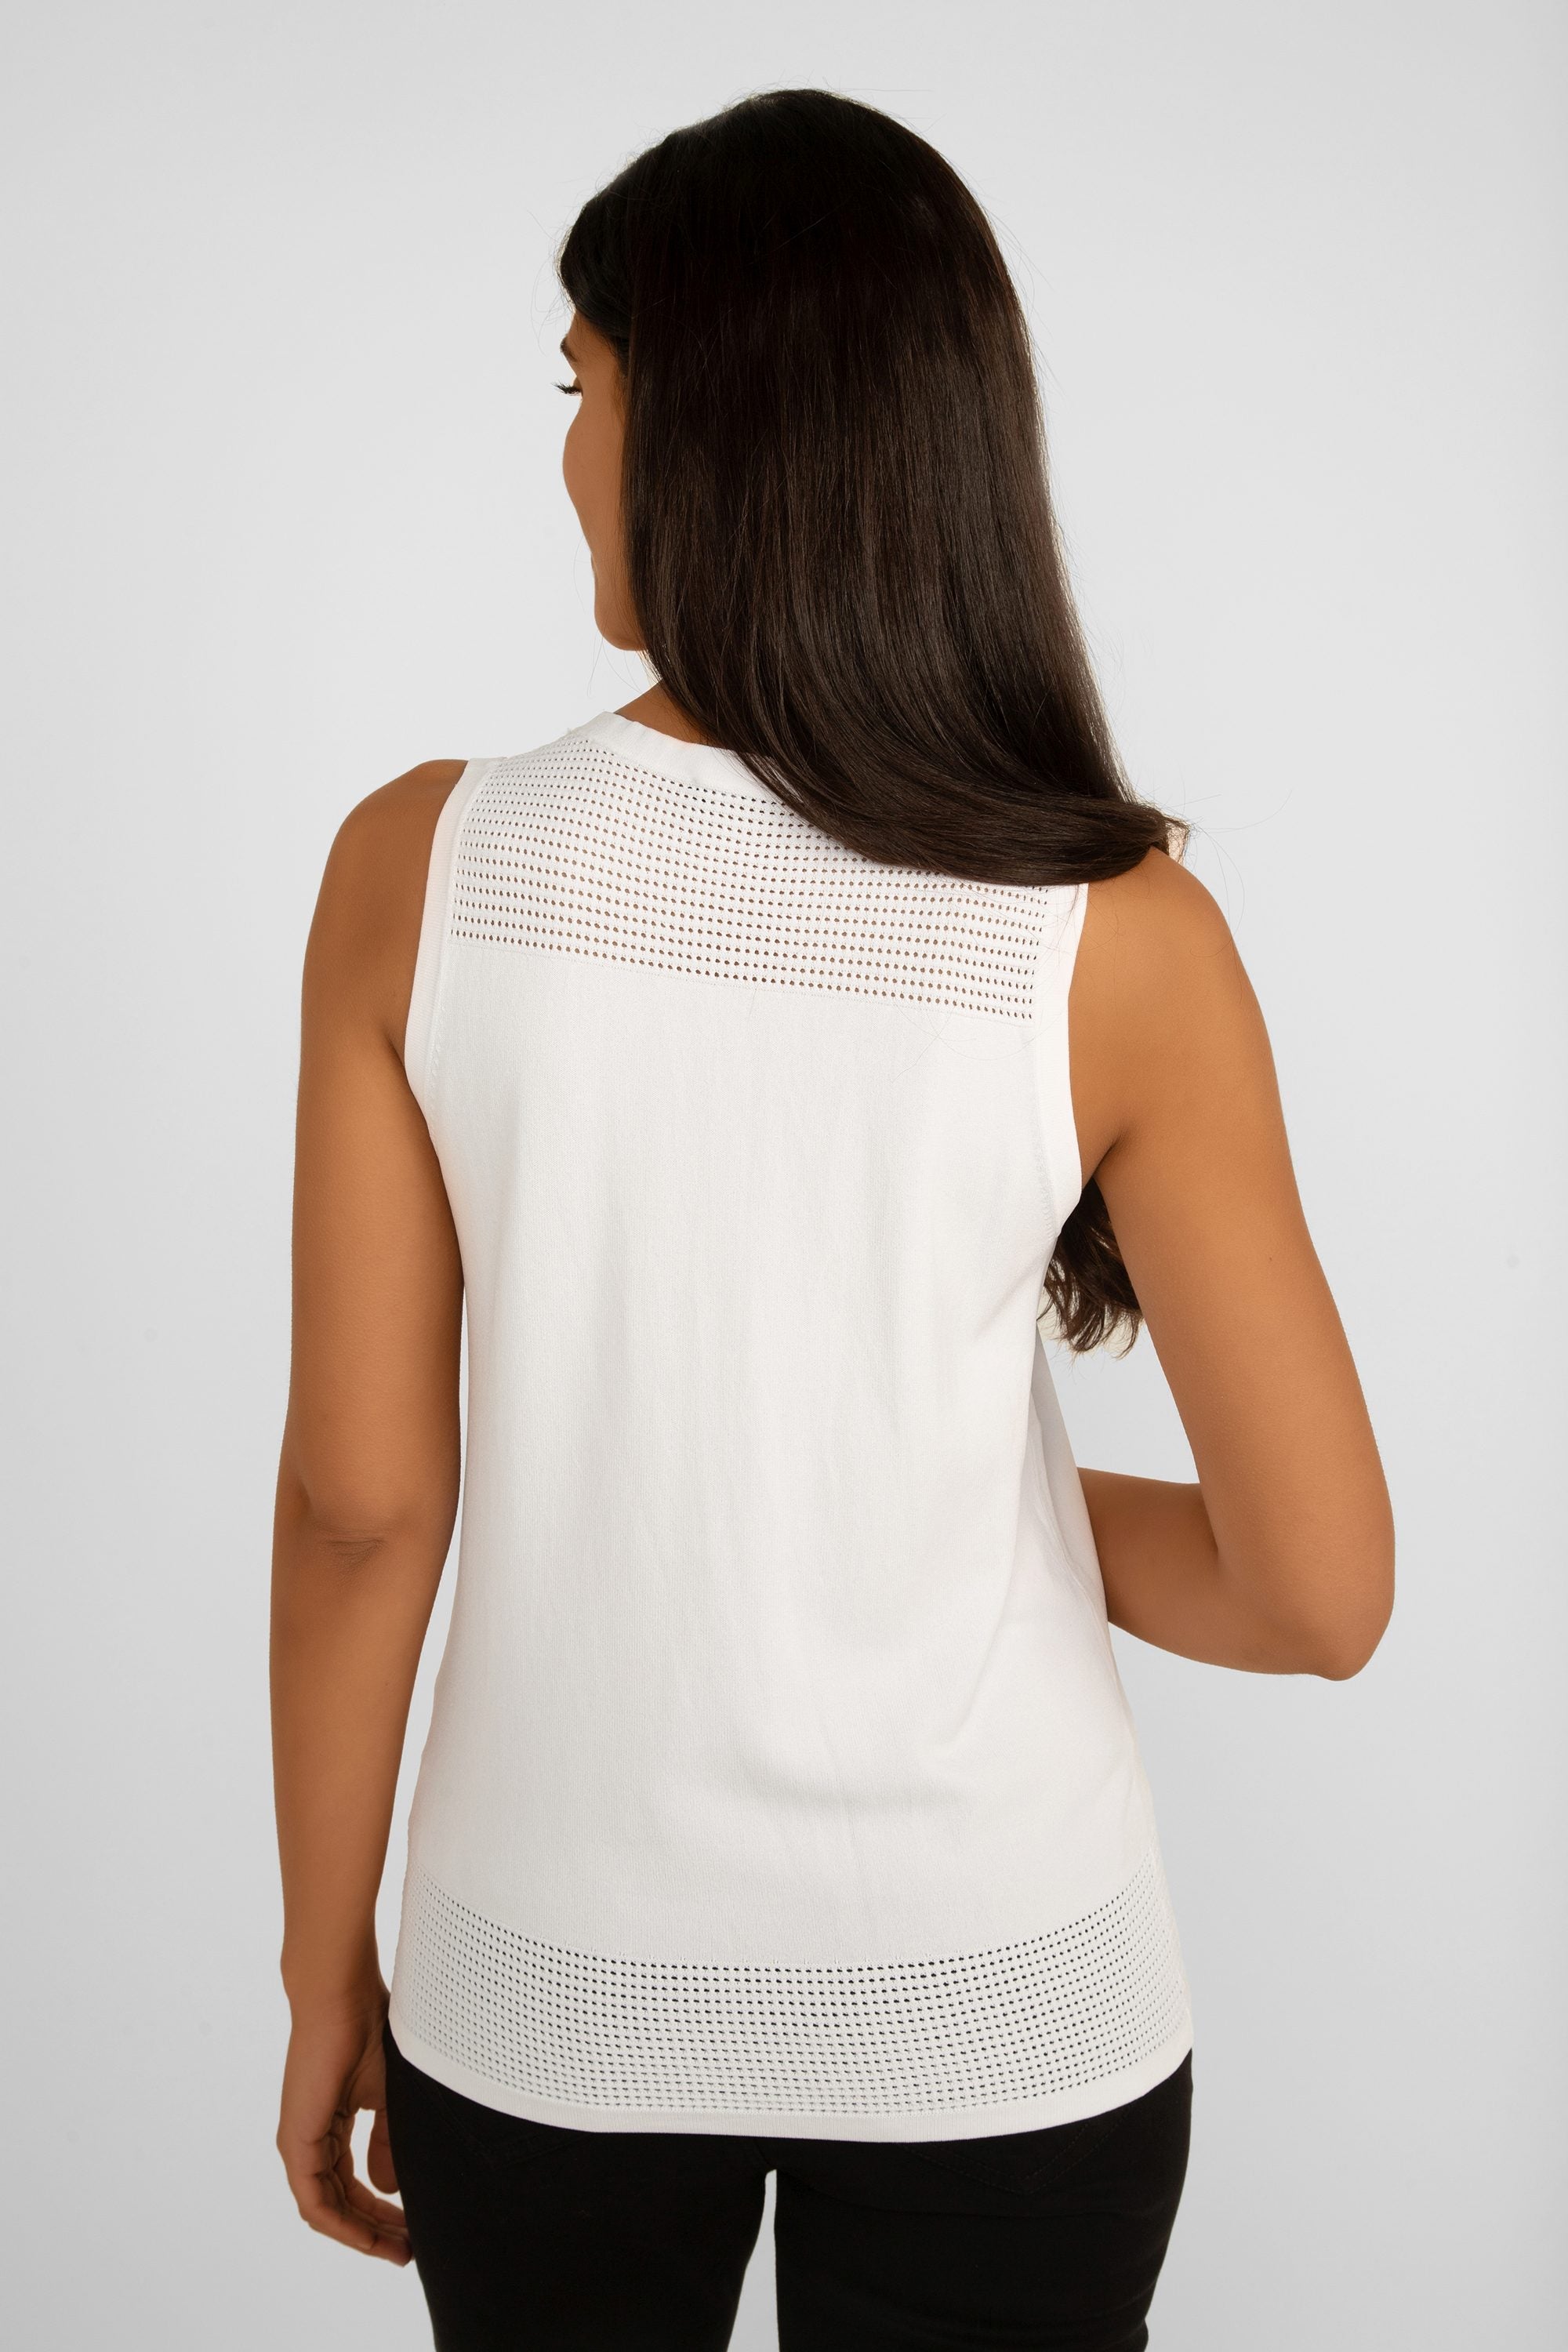 Picadilly (JK354) Women's Sleeveless Sweater Knit Tank with Mesh Panels on Shoulders and Hem in White